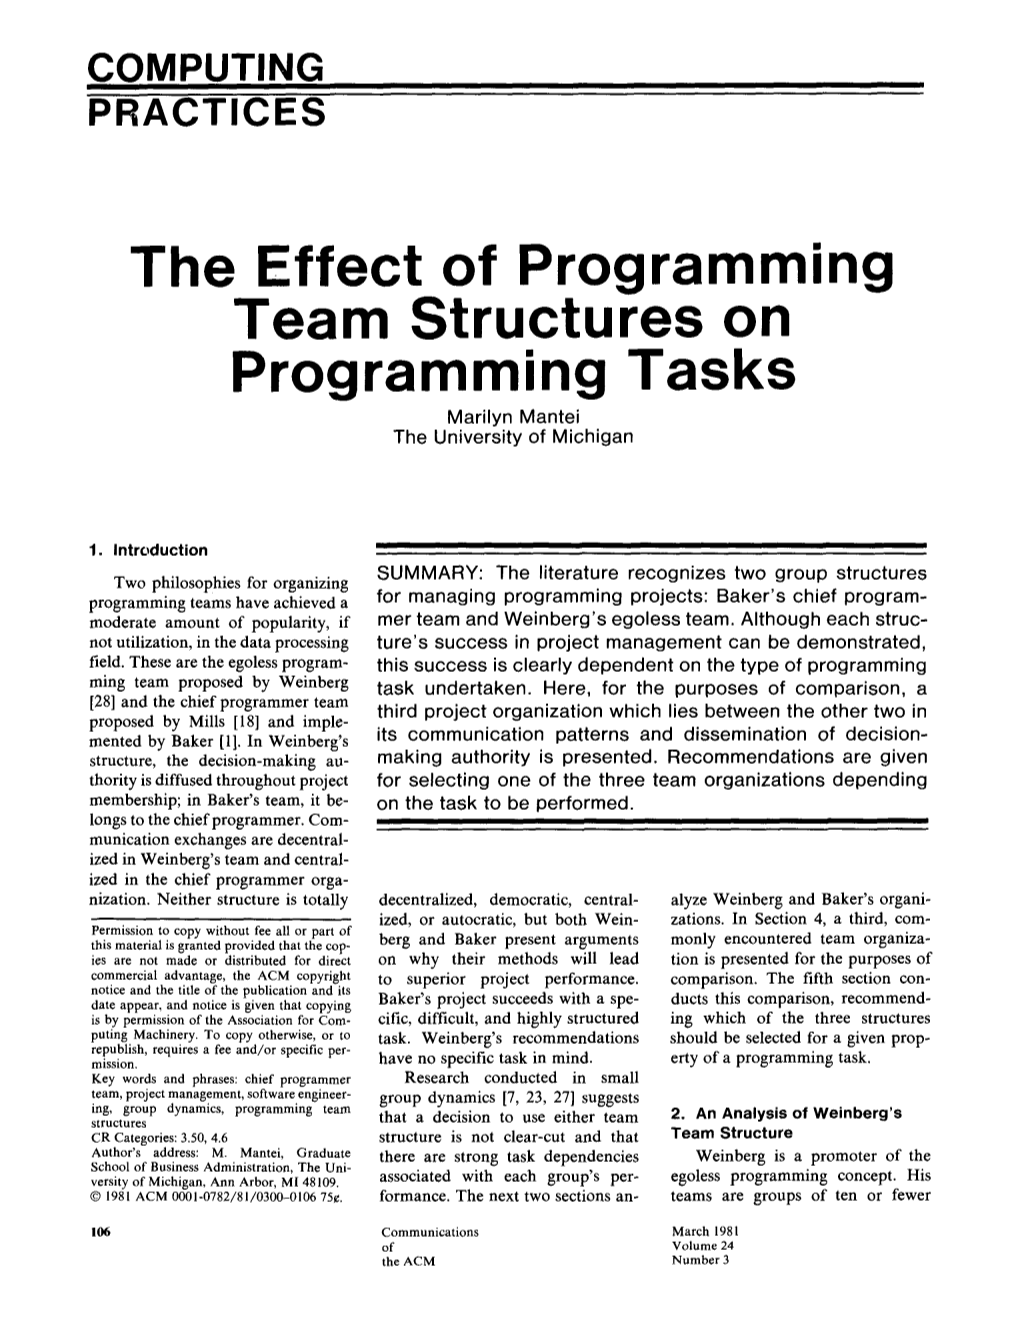 The Effect of Programming Team Structures on Programming Tasks Marilyn Mantei the University of Michigan